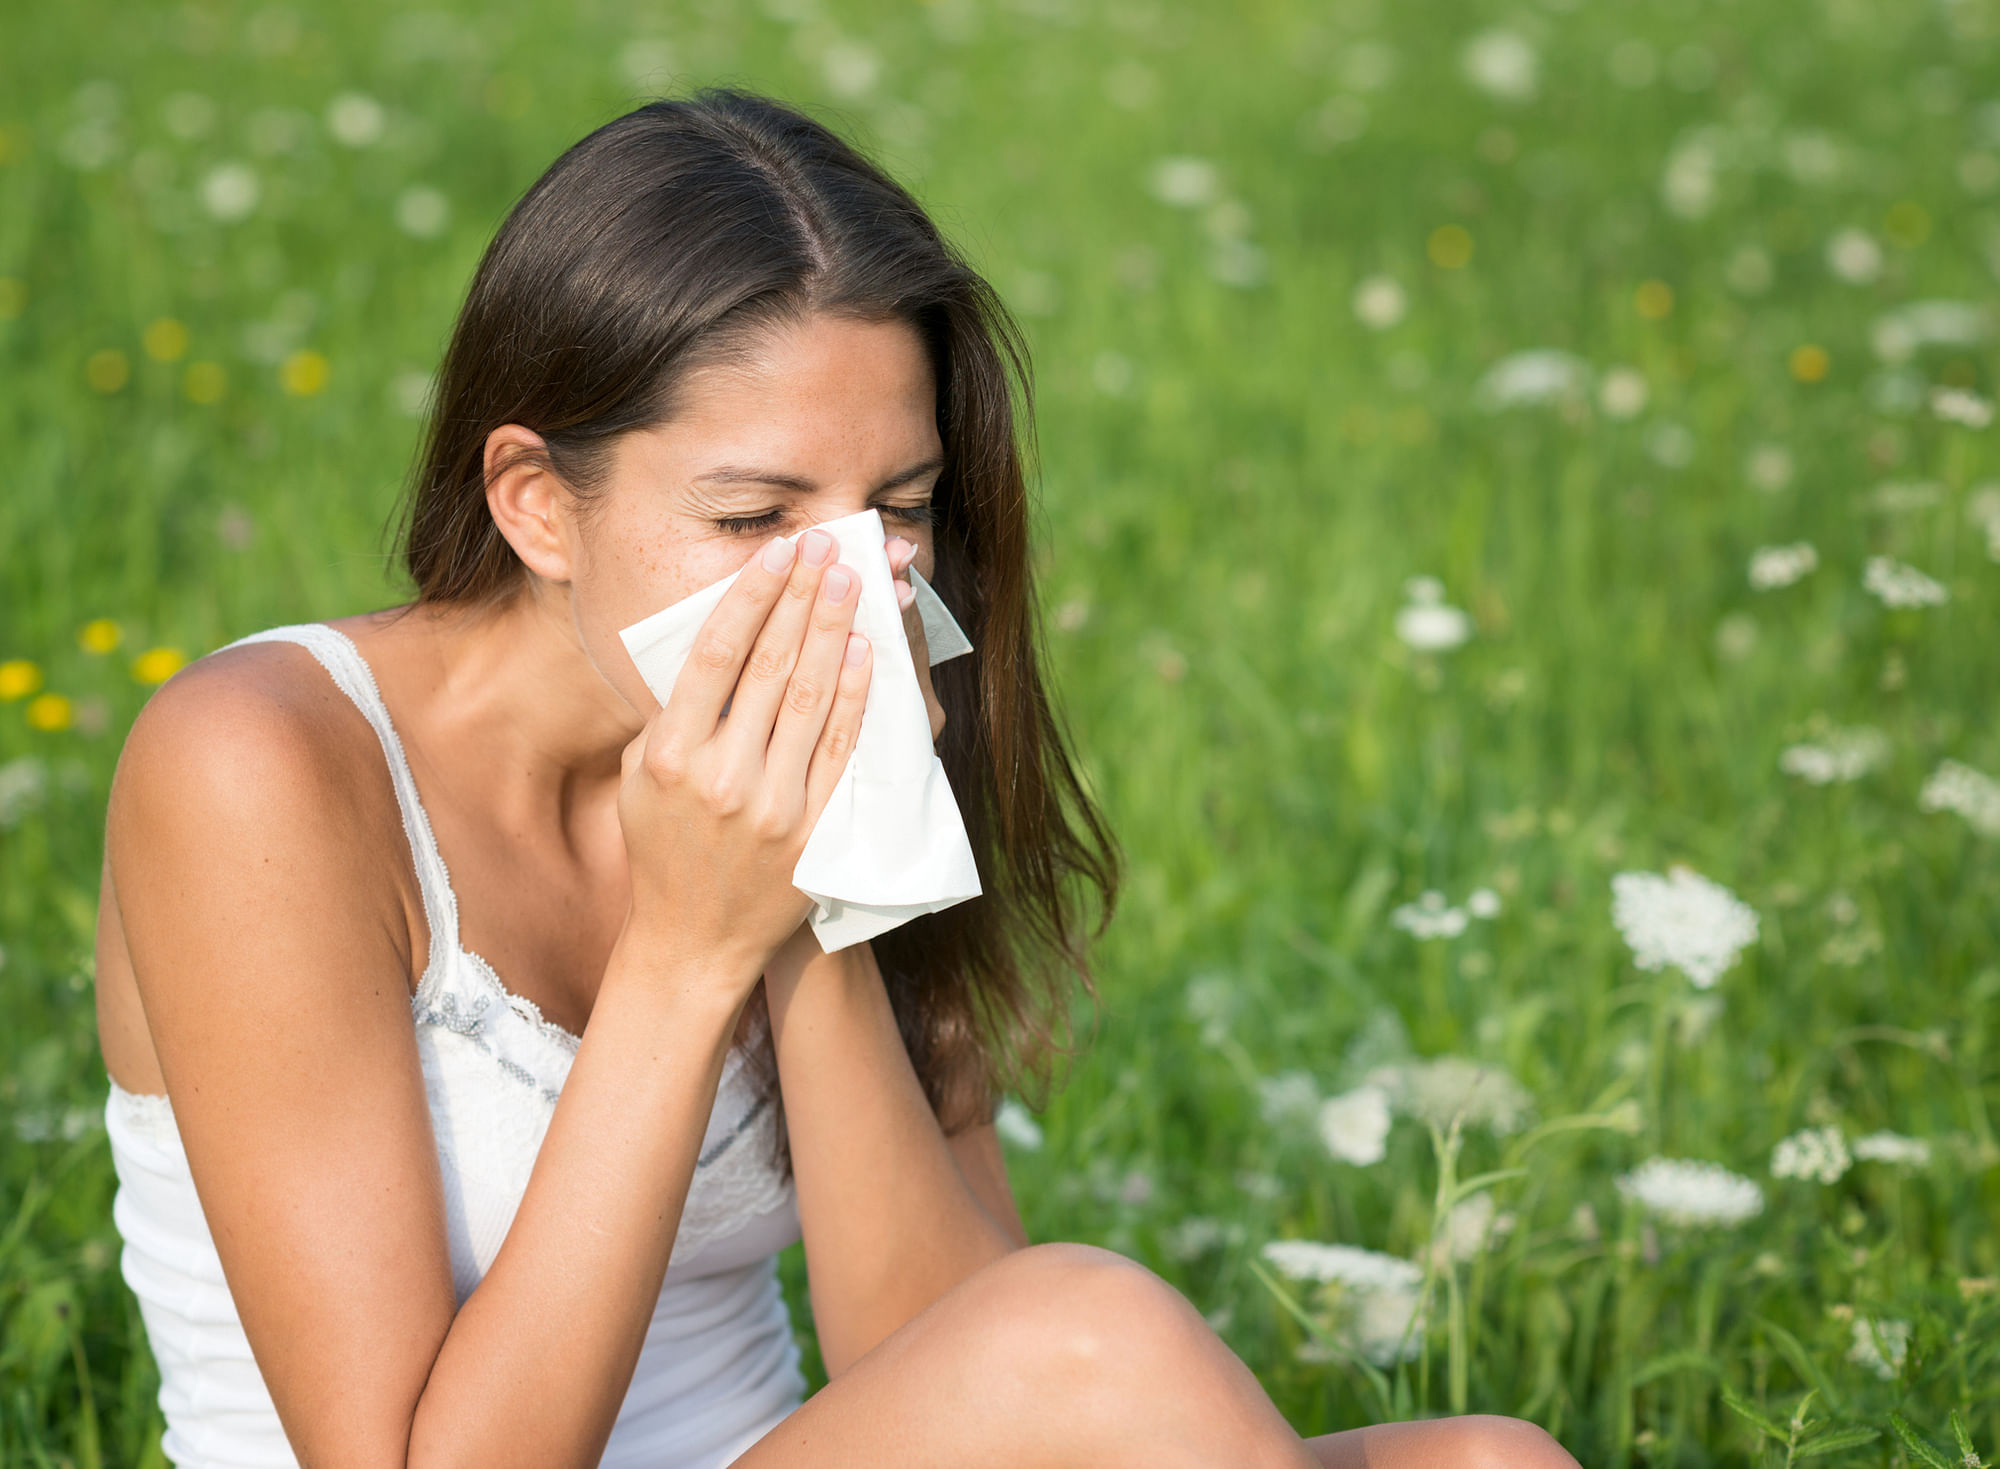 There may be a link between seasonal allergies and depression, but the jury’s out on a definitive, causal connection.